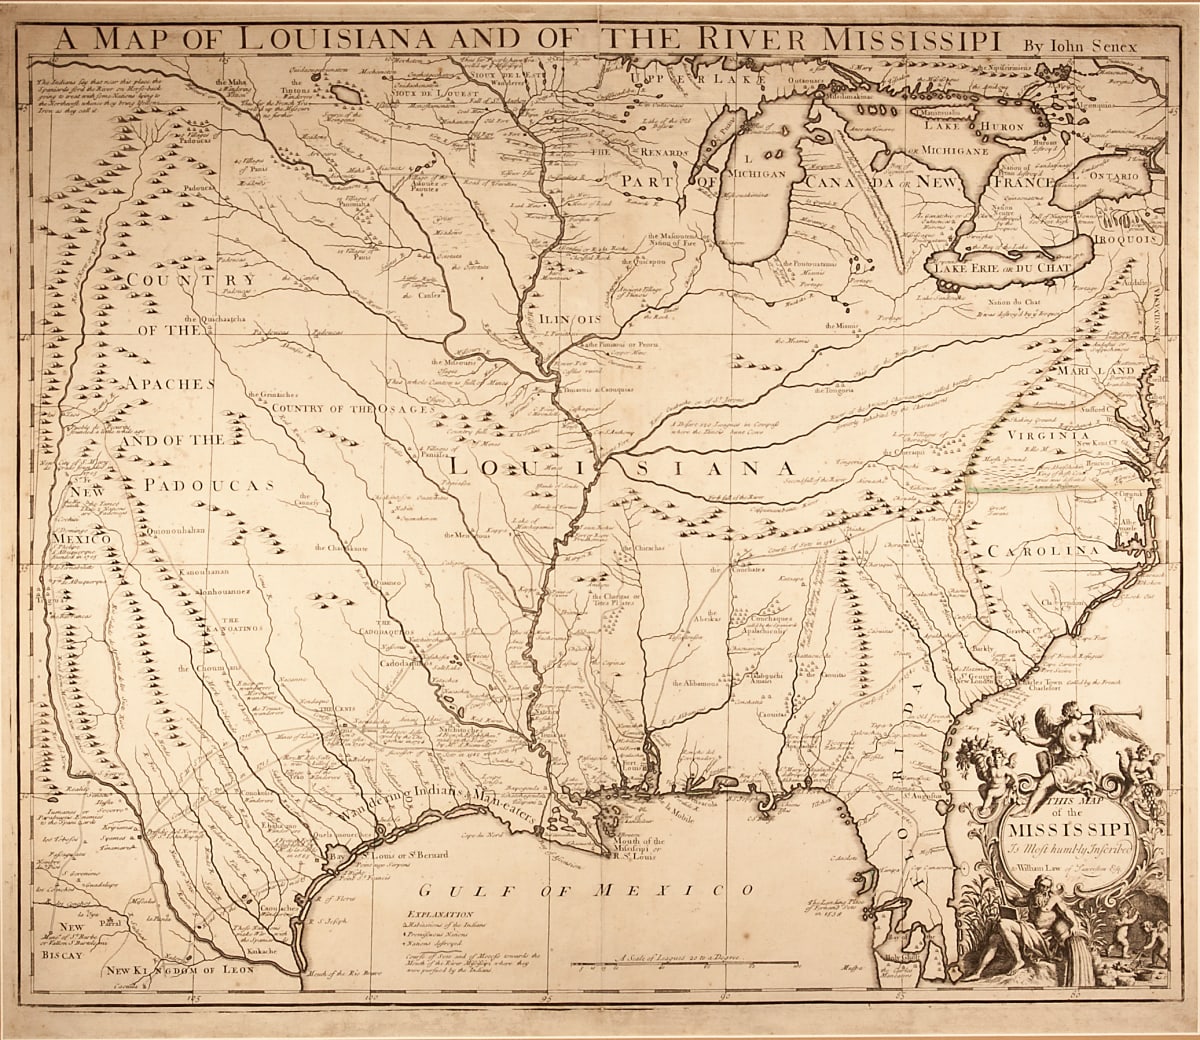 A Map of Louisiana and of the River Mississippi from the collection of The  Supreme Court of Ohio